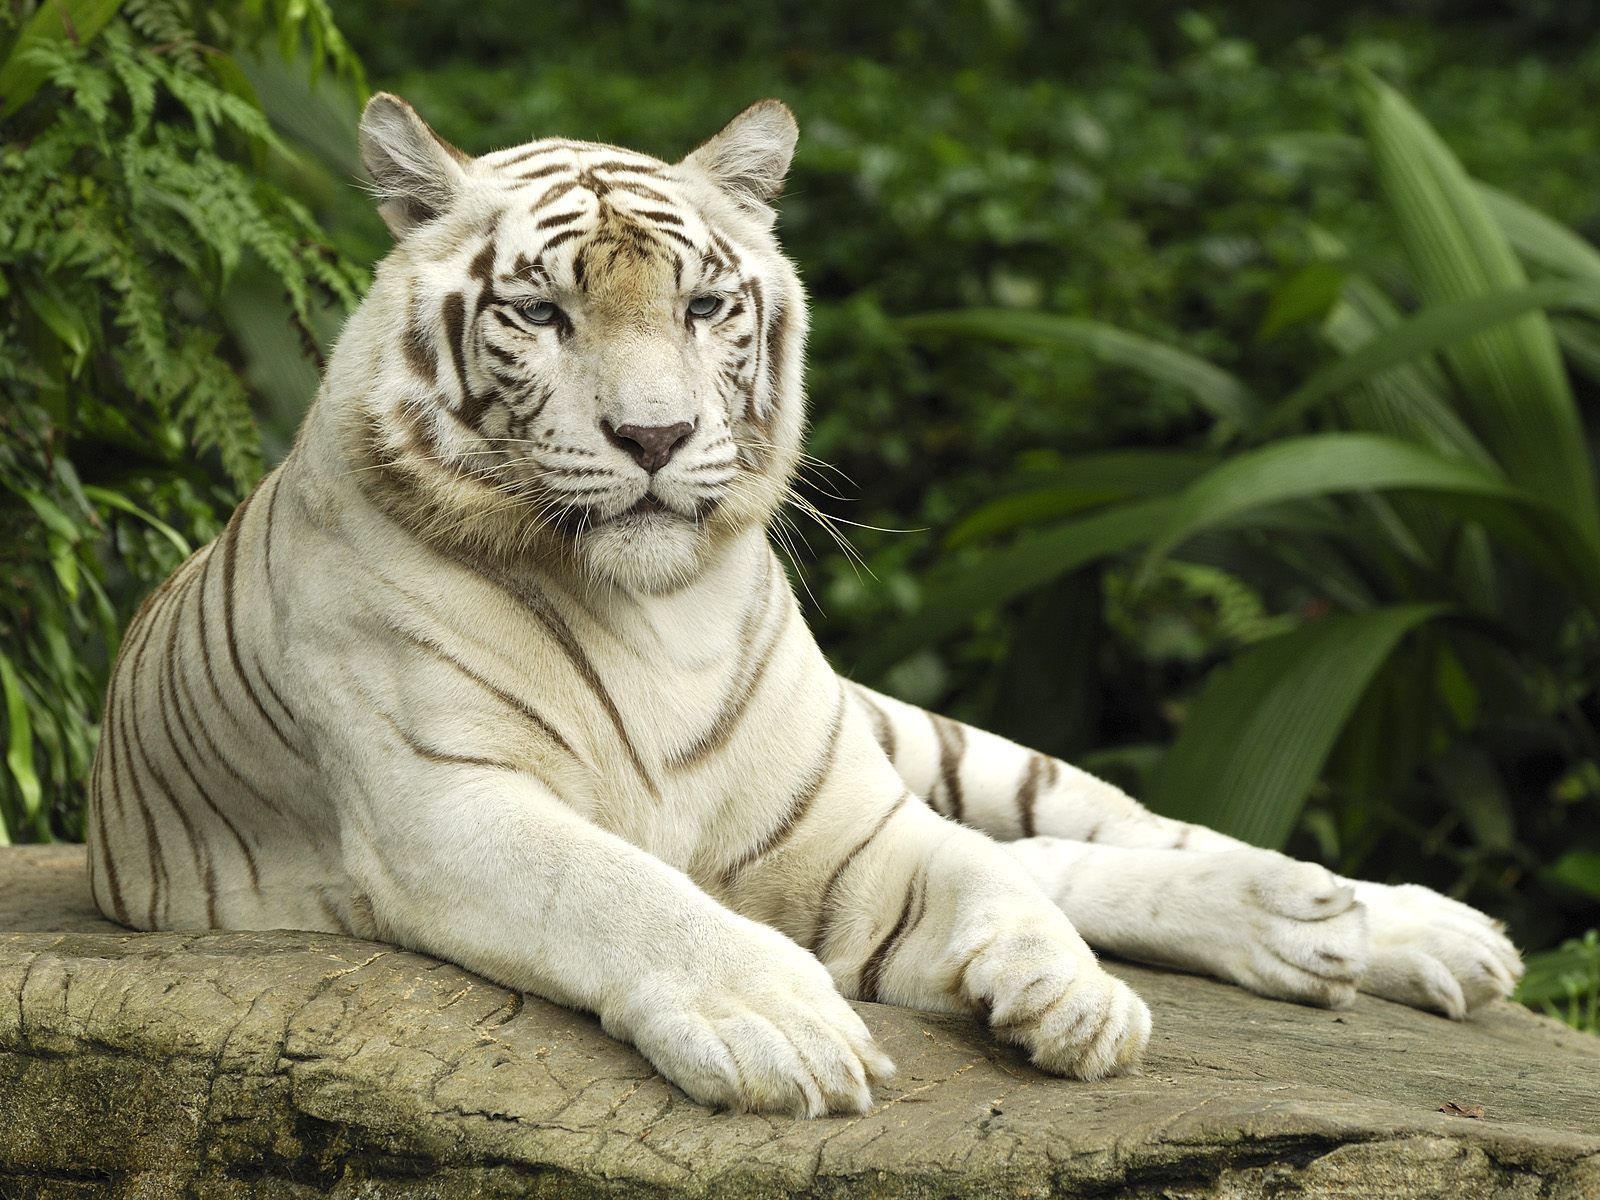 Download 21 4k-tiger-wallpapers Wild-Tigers-Wallpapers-4K-Ultra-HD-for-Android-APK-Download.jpg